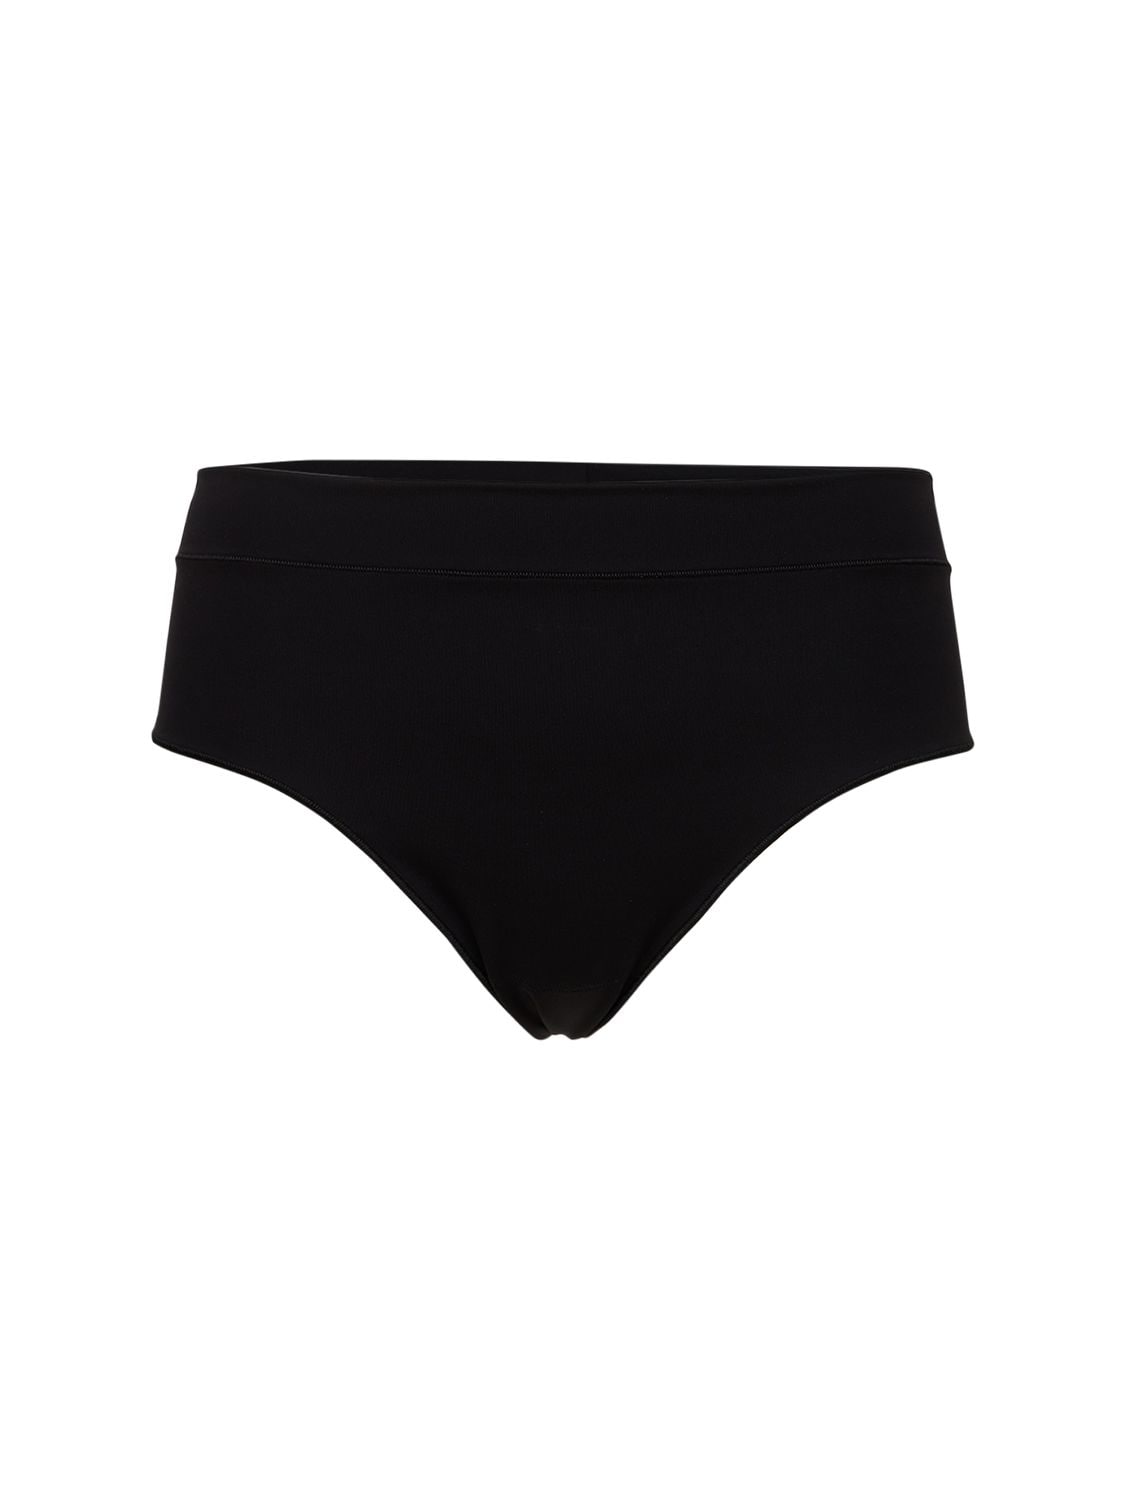 Eres Modele Thong W/ Invisible Seam In Black